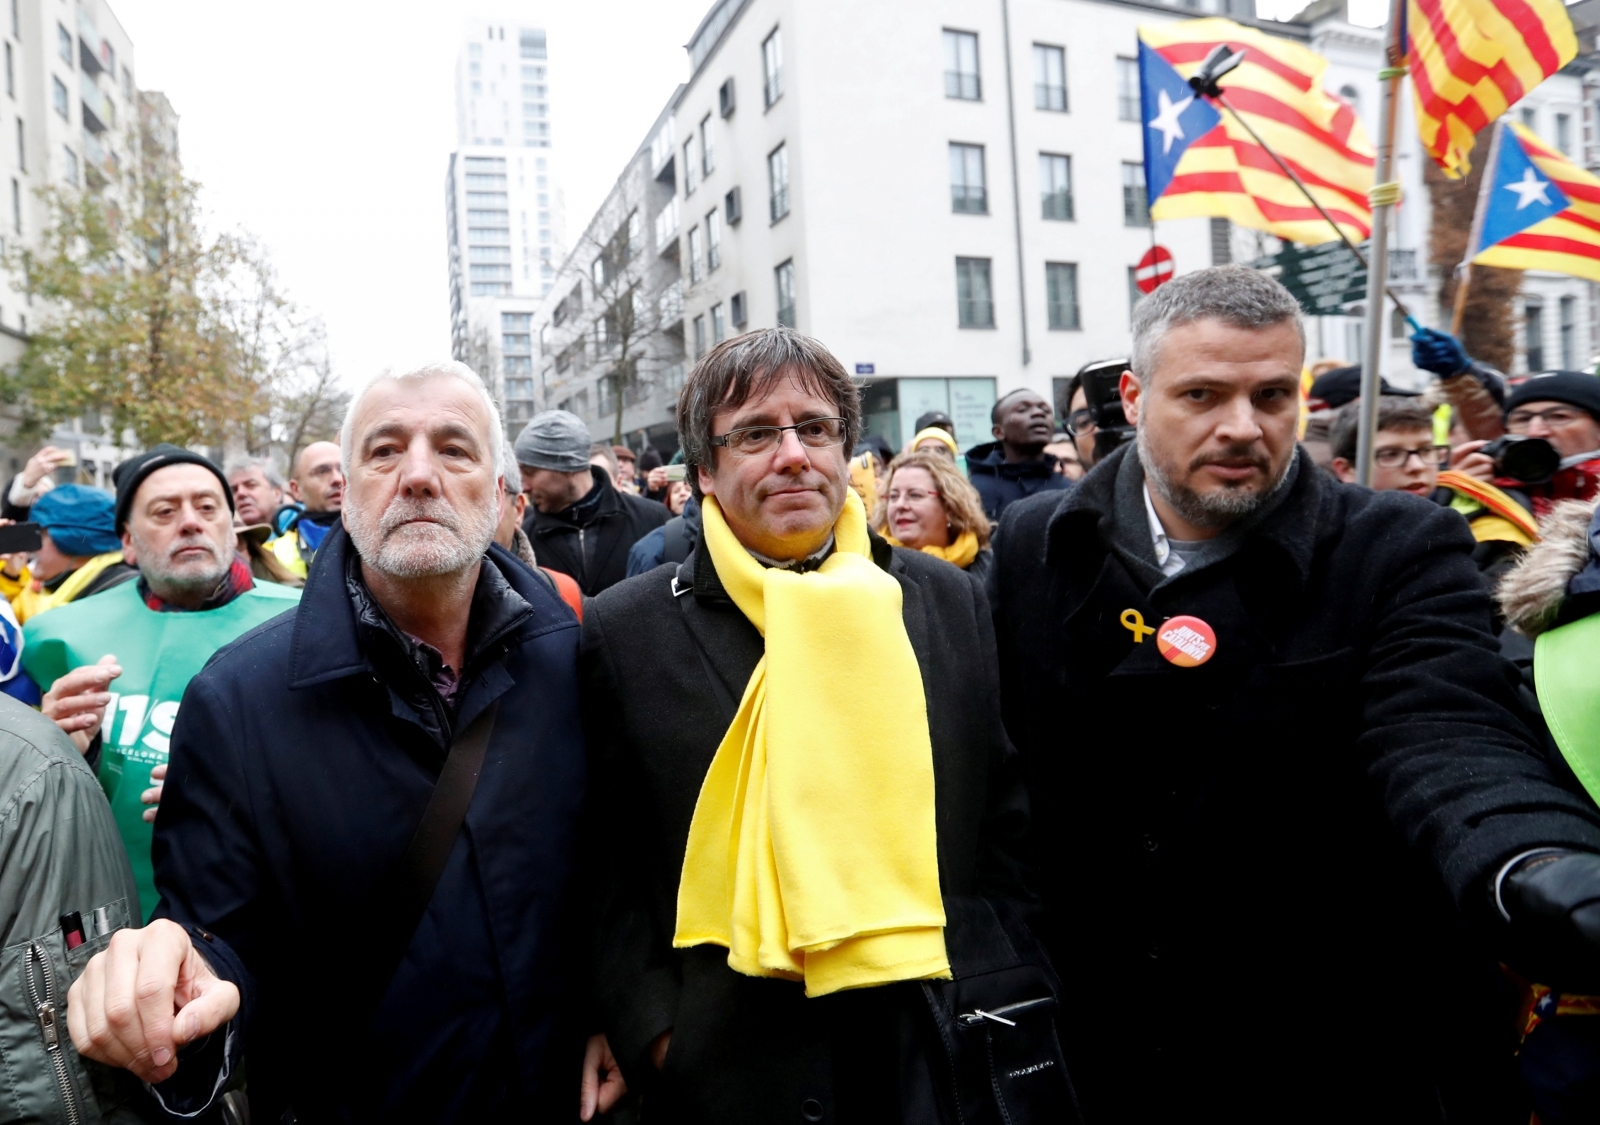 Catalonia independence Brussels